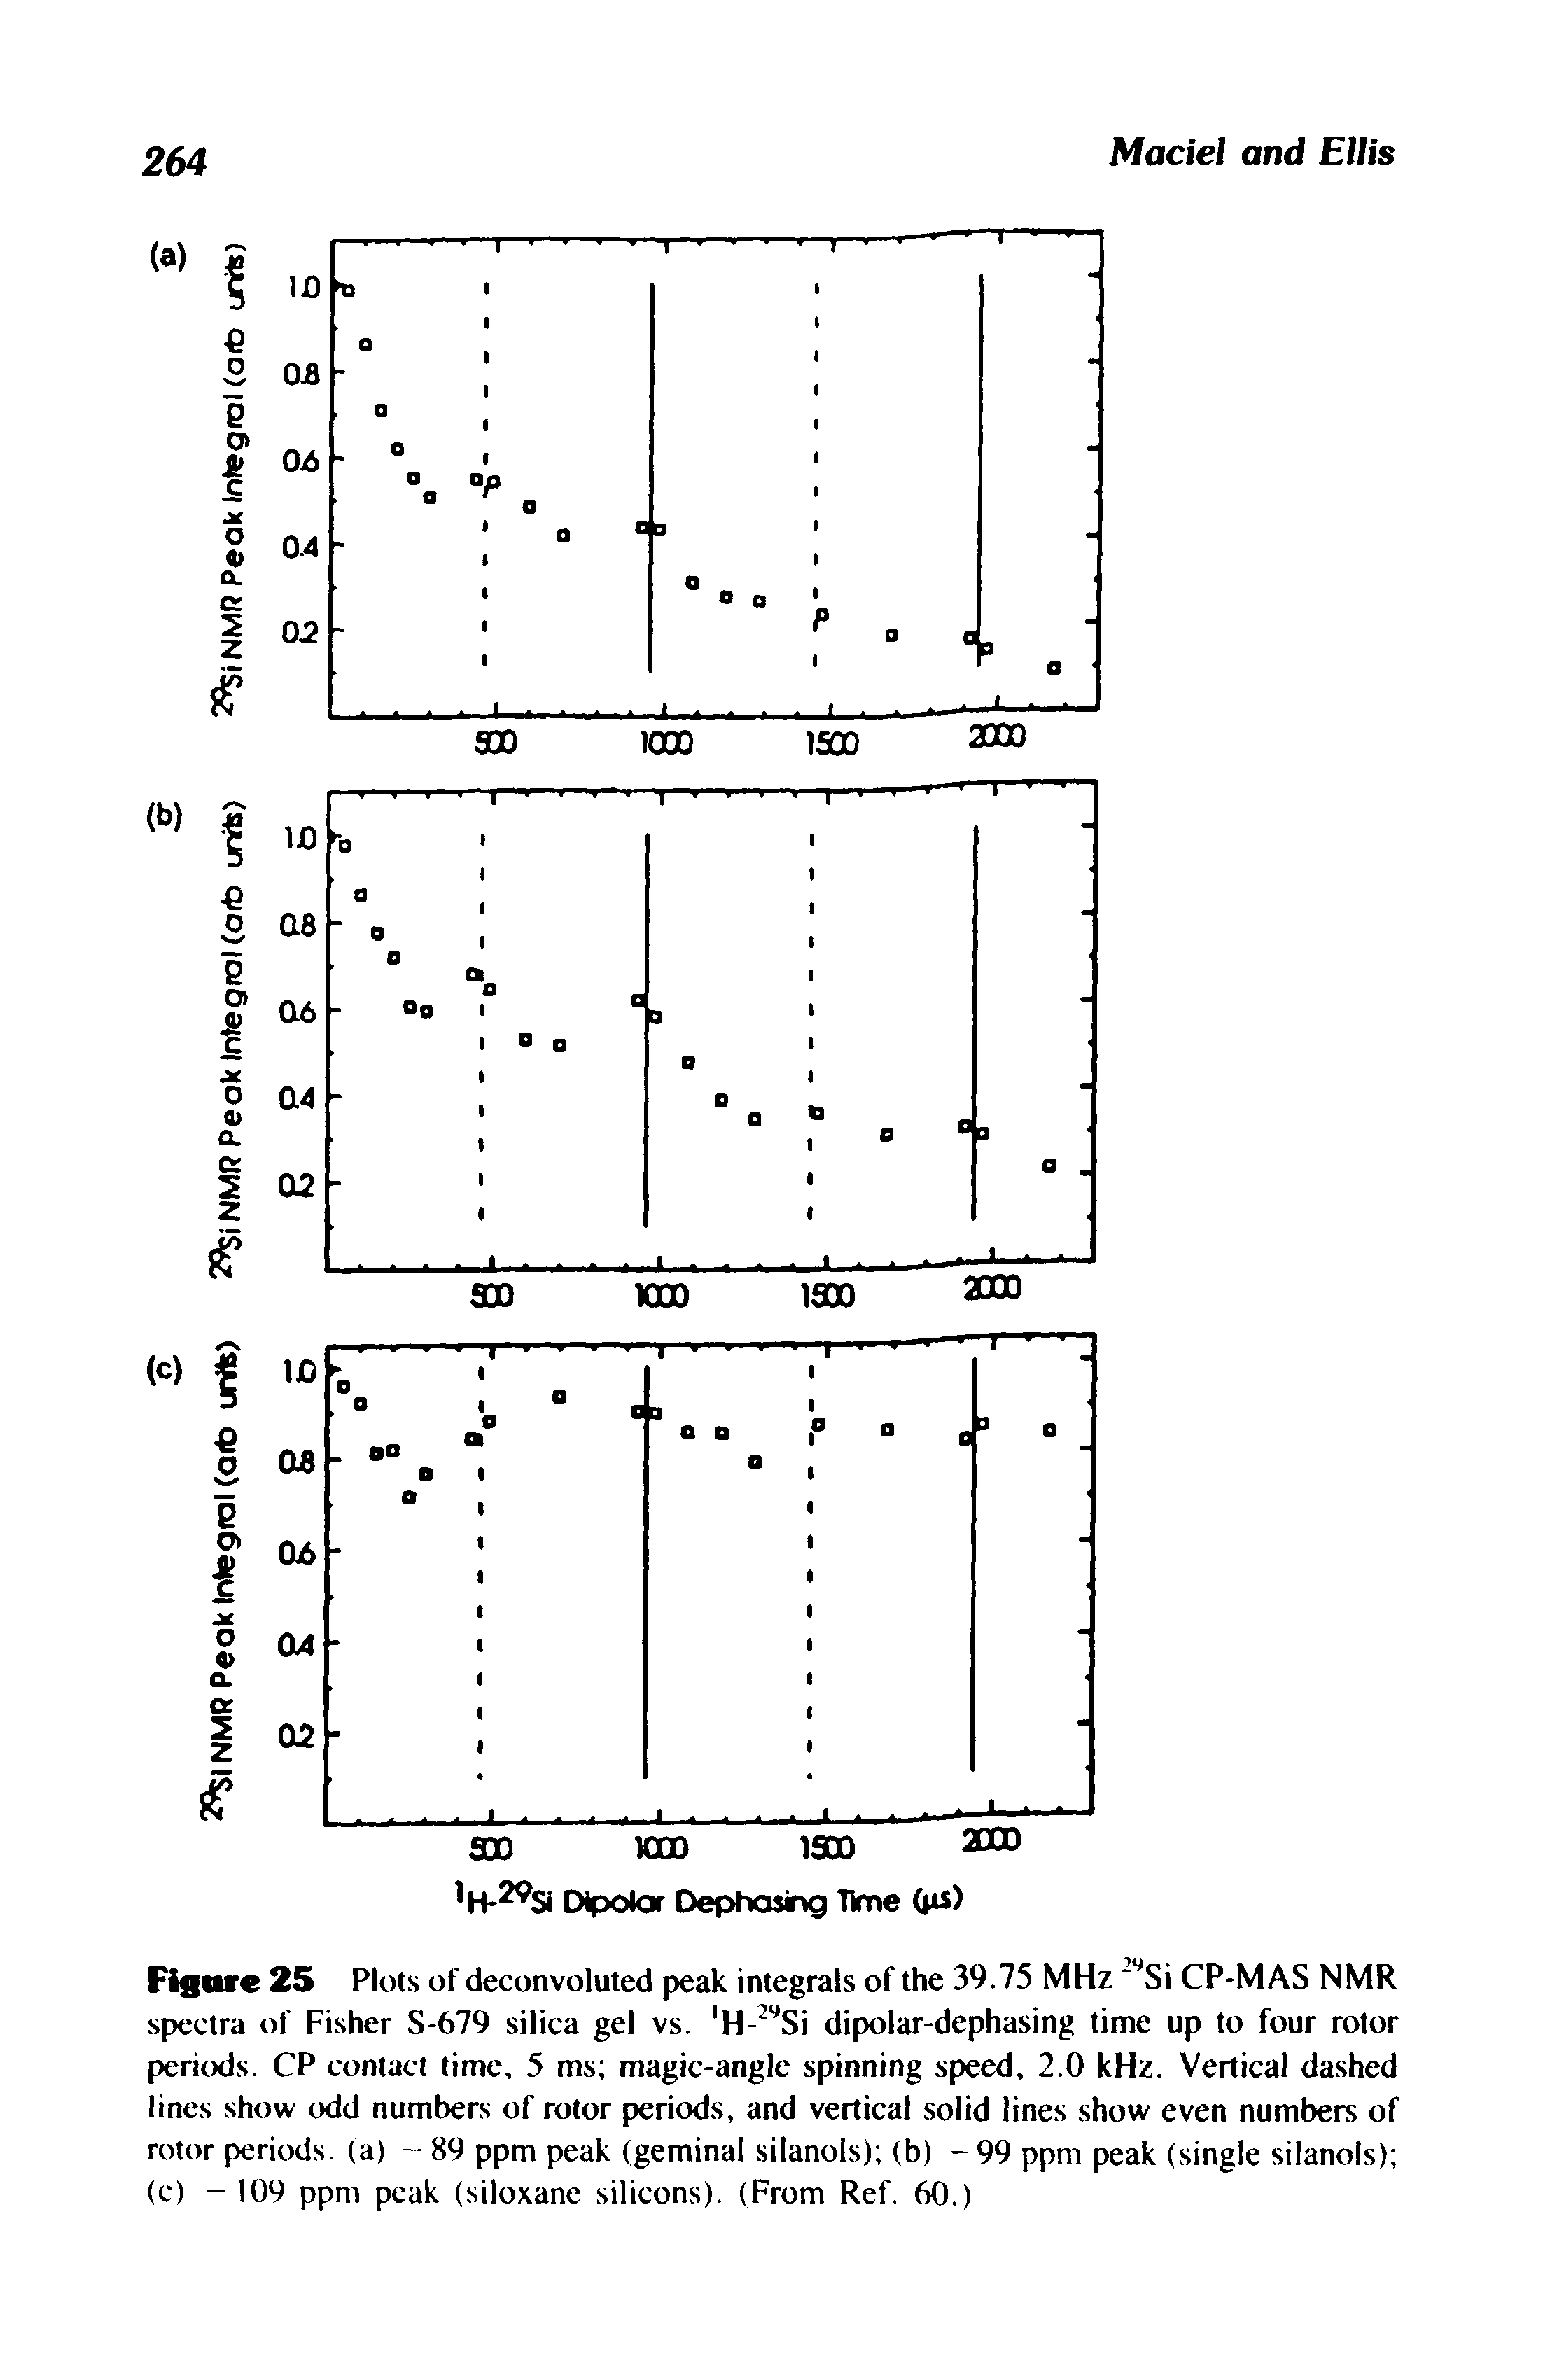 Figure 25 Plots of deconvoluted peak integrals of the 39.75 MHz Si CP-MAS NMR spectra of Fisher S-679 silica gel vs. H- Si dipolar-dephasing time up to four rotor perkxJs. CP contact time, 5 ms magic-angle spinning speed, 2.0 kHz. Vertical da.shed lines show odd numbers of rotor periods, and vertical solid lines show even numbers of rotor periods, (a) - 89 ppm peak (geminal silanols) (b) -99 ppm peak (single silanols) (c) - 109 ppm peak (siloxane silicons). (From Ref. 60.)...